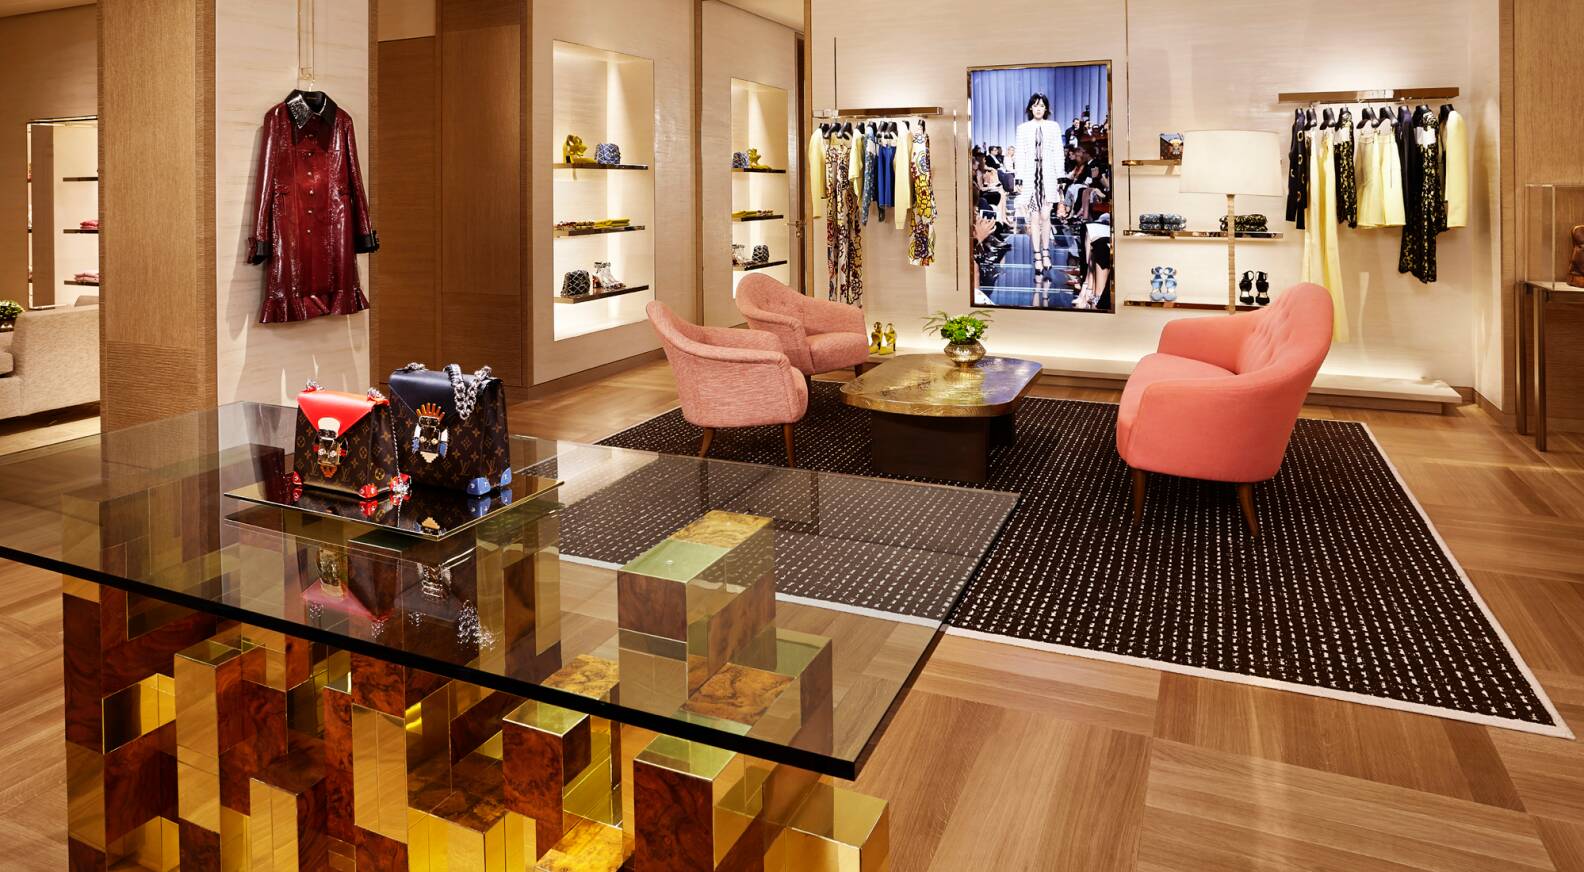 The Louis Vuitton Moet Hennessy store on Avenue Montaigne in Paris